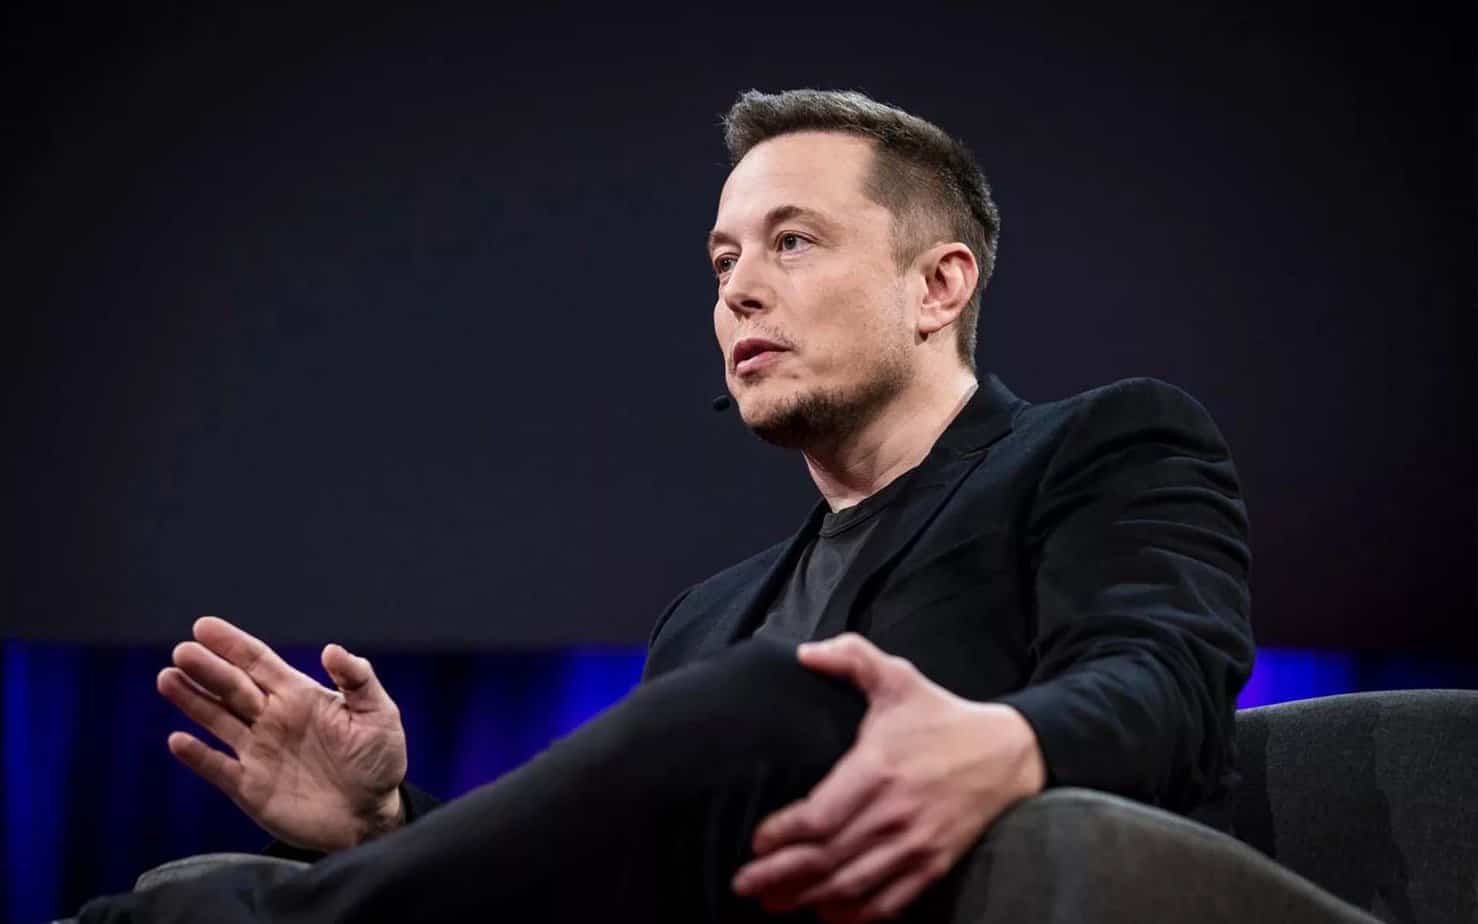 Elon Musk Announces YouTube And Netflix Streaming, Will Be Available 'Soon' In Teslas